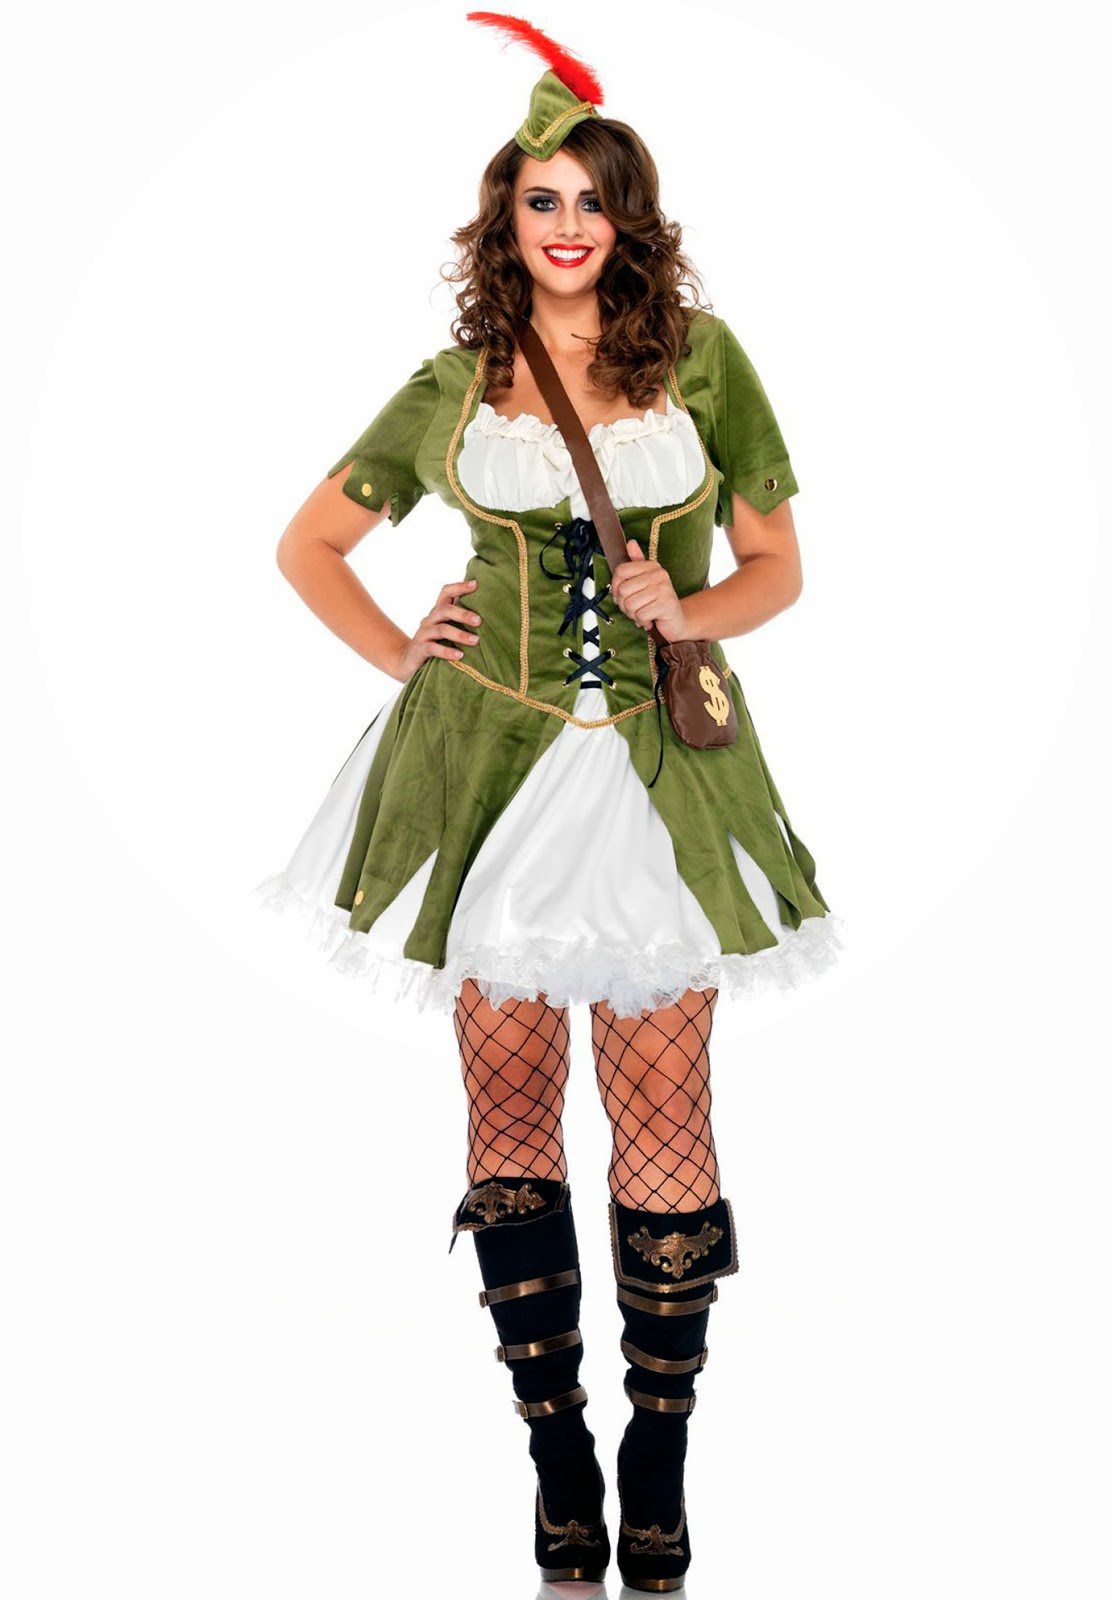 Hd Wallpapers Blog Plus Size Halloween Costumes